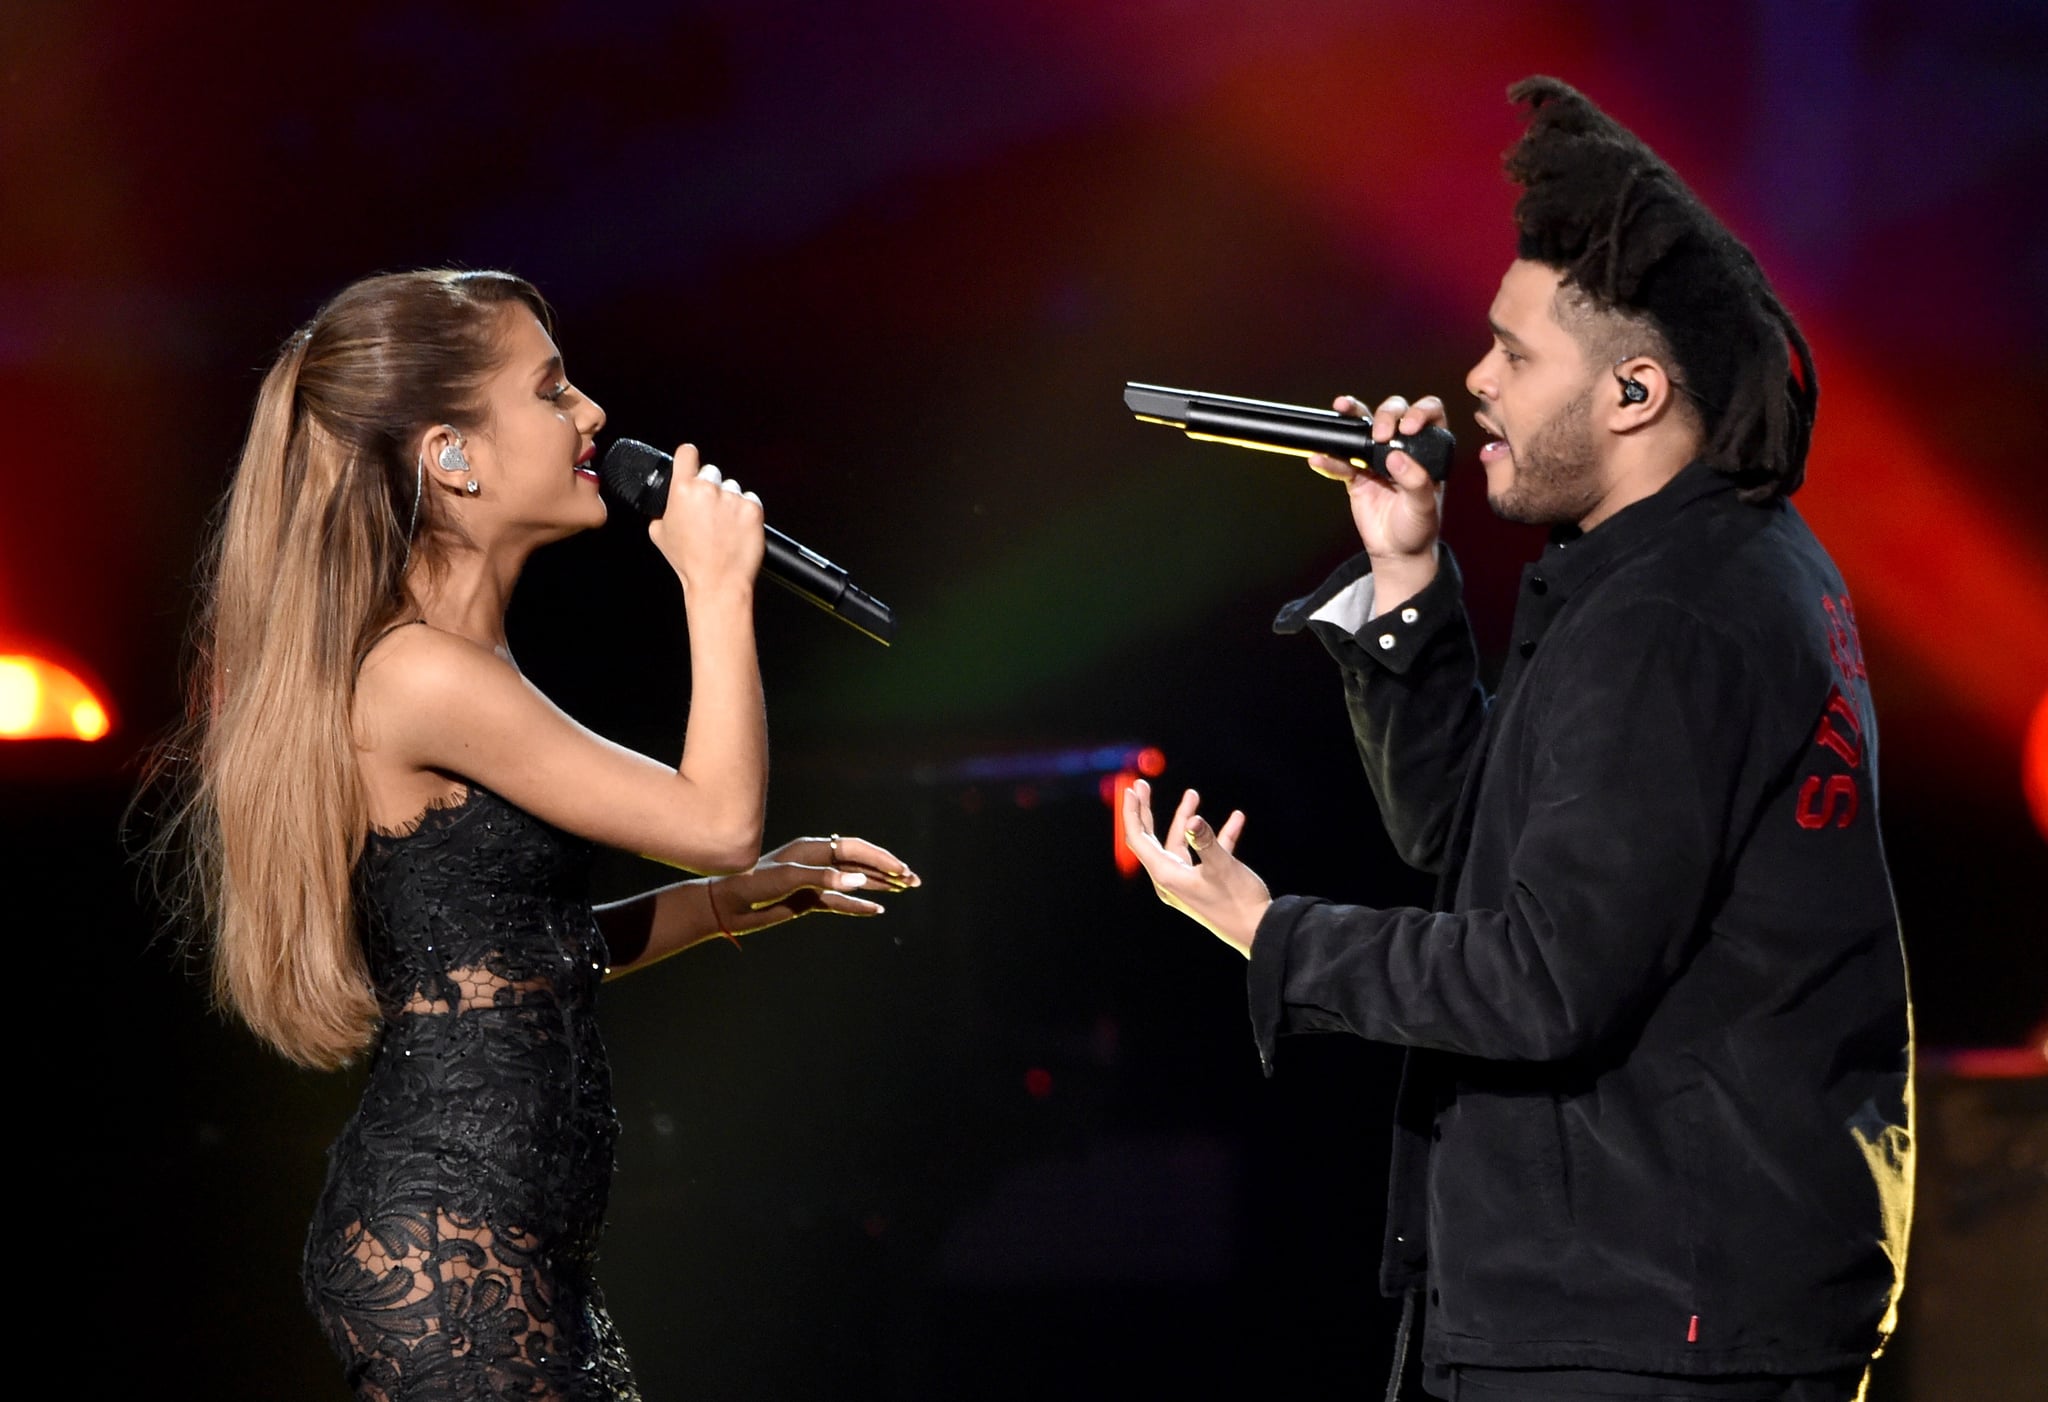 LOS ANGELES, CA - NOVEMBER 23:  Recording artists Ariana Grande (L) and The Weeknd  perform onstage at the 2014 American Music Awards at Nokia Theatre L.A. Live on November 23, 2014 in Los Angeles, California.  (Photo by Kevin Winter/Getty Images)